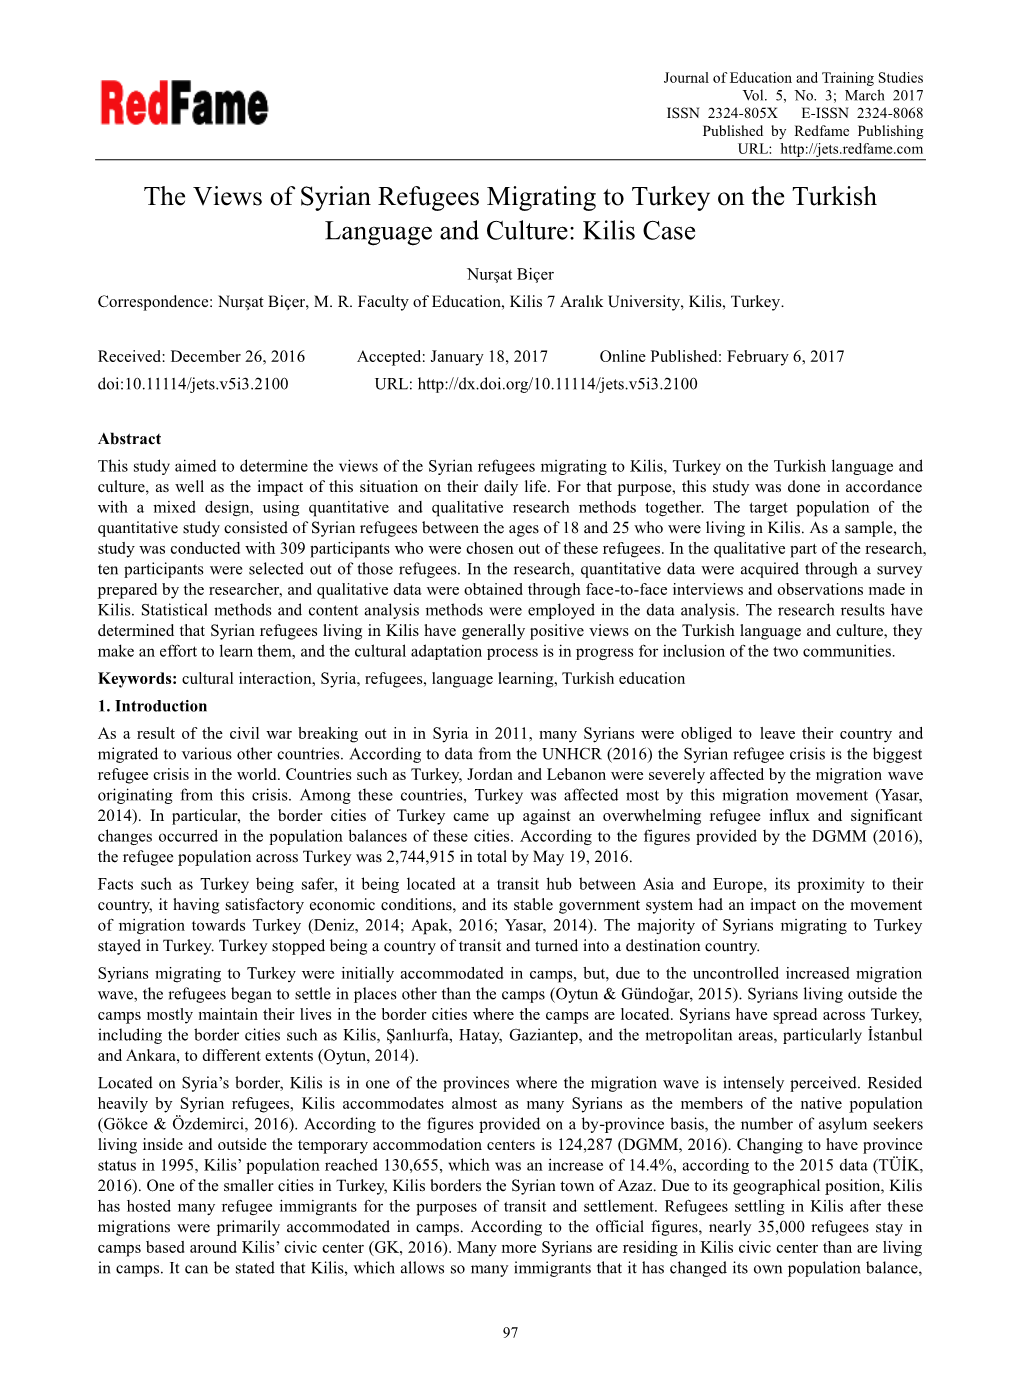 The Views of Syrian Refugees Migrating to Turkey on the Turkish Language and Culture: Kilis Case